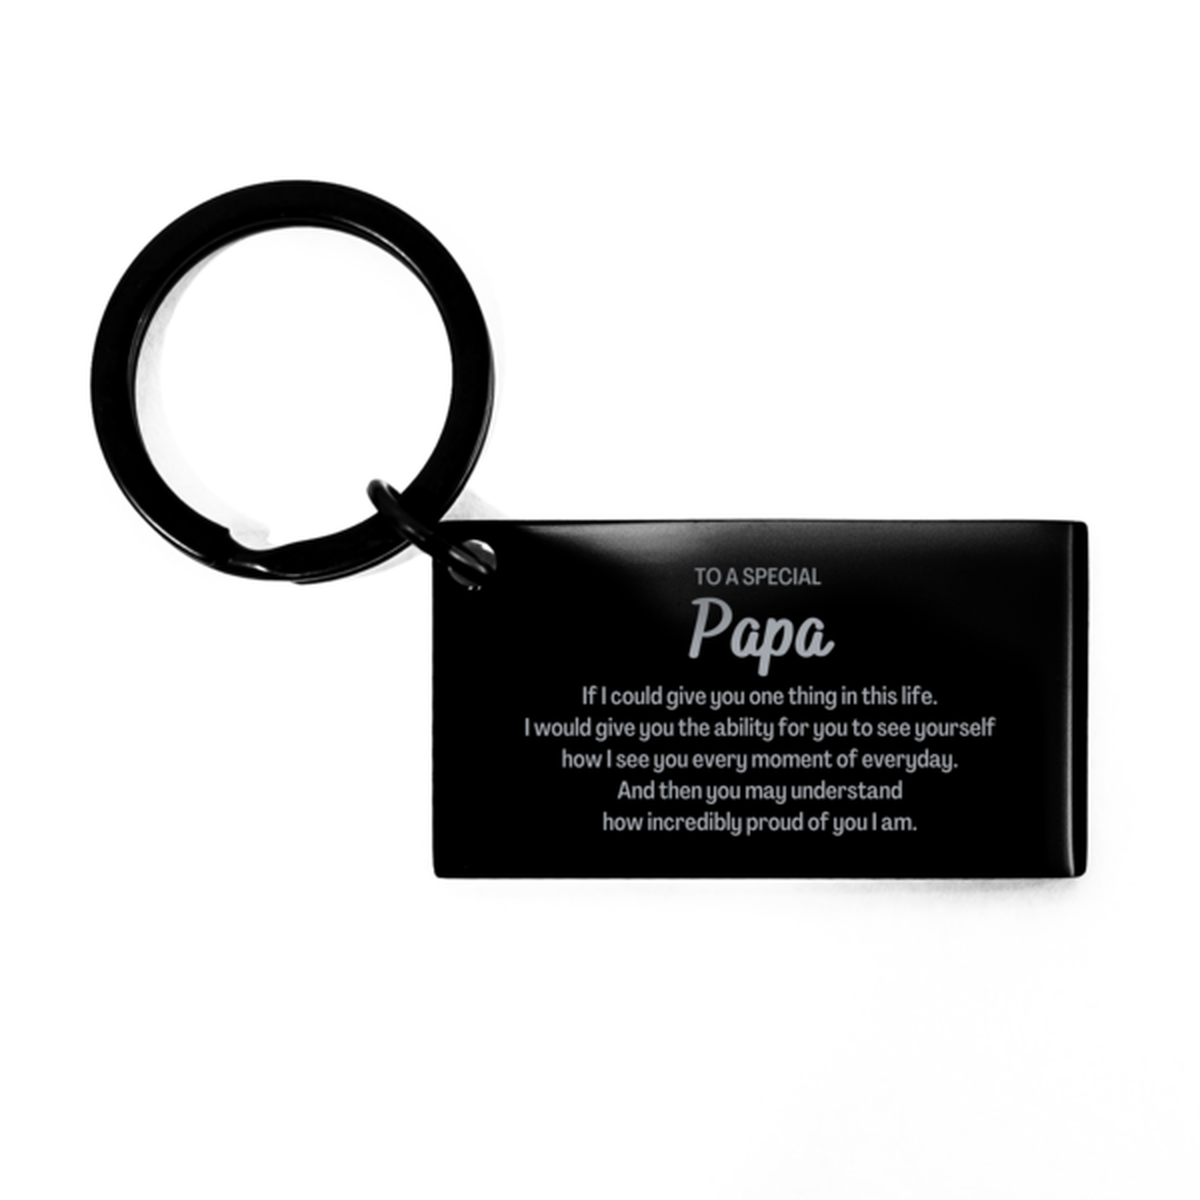 To My Papa Keychain, Gifts For Papa Engraved, Inspirational Gifts for Christmas Birthday, Epic Gifts for Papa To A Special Papa how incredibly proud of you I am